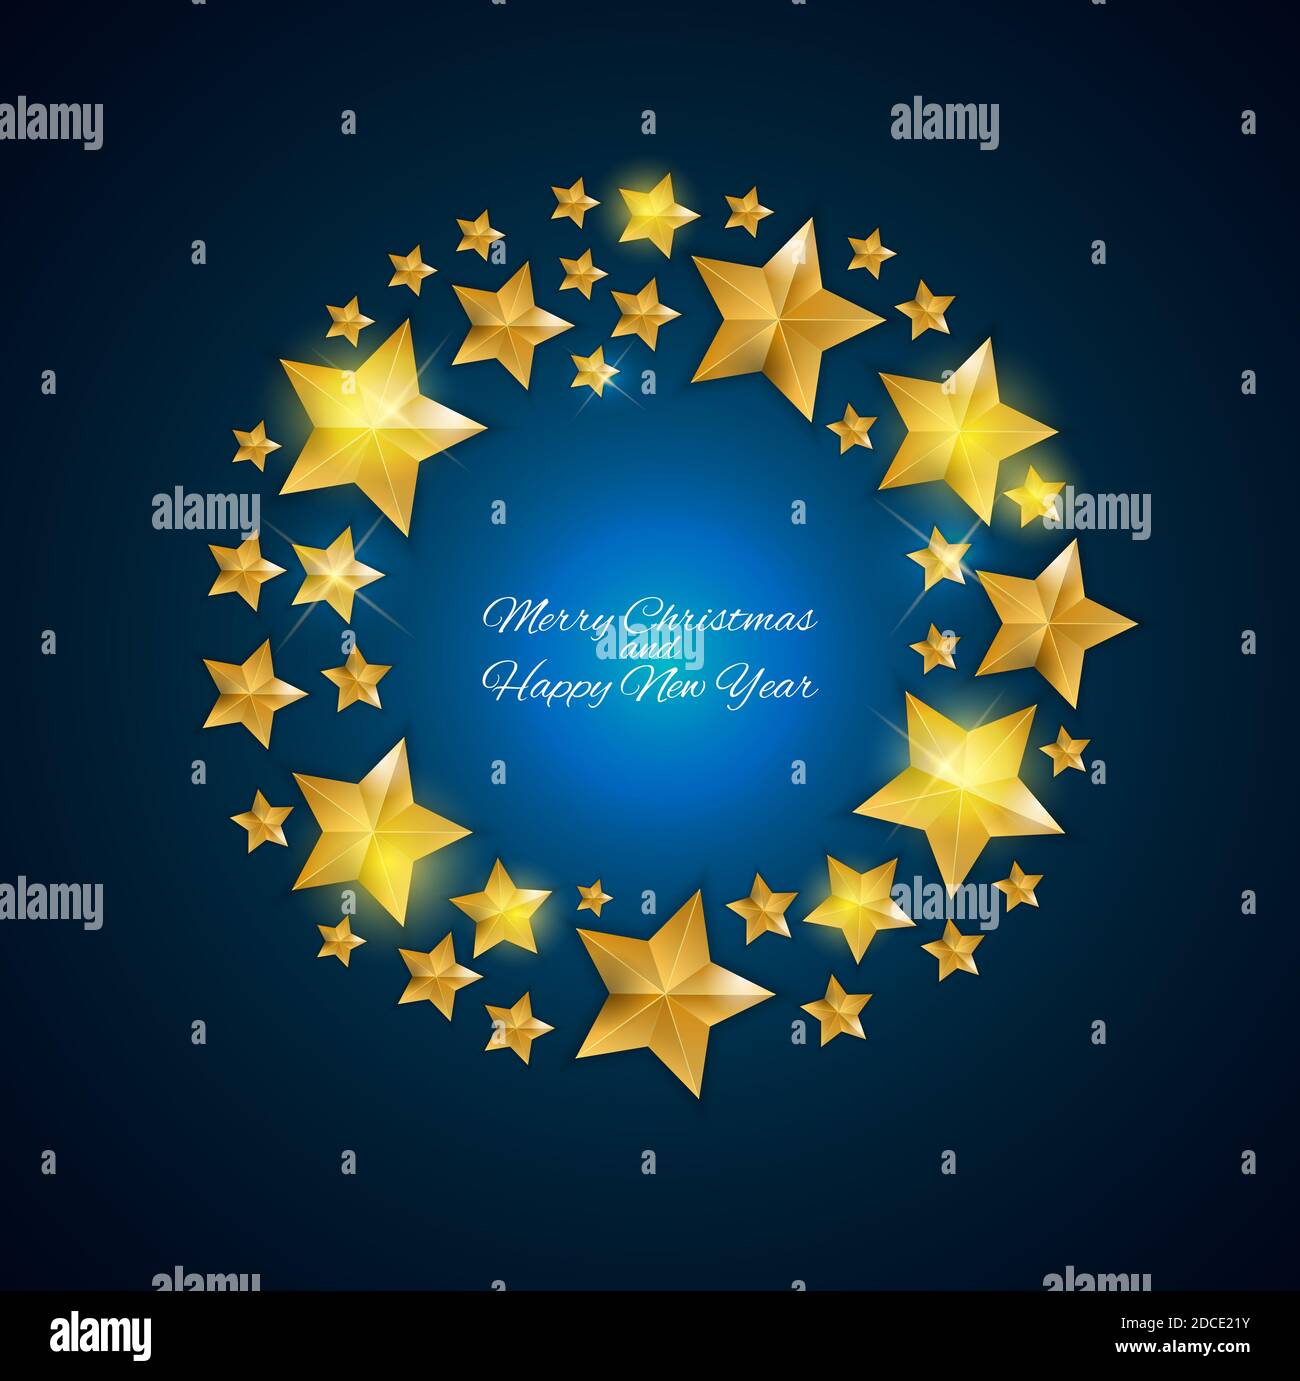 Happy New Year and Christms Background with Golden Stars. Illustration Stock Photo